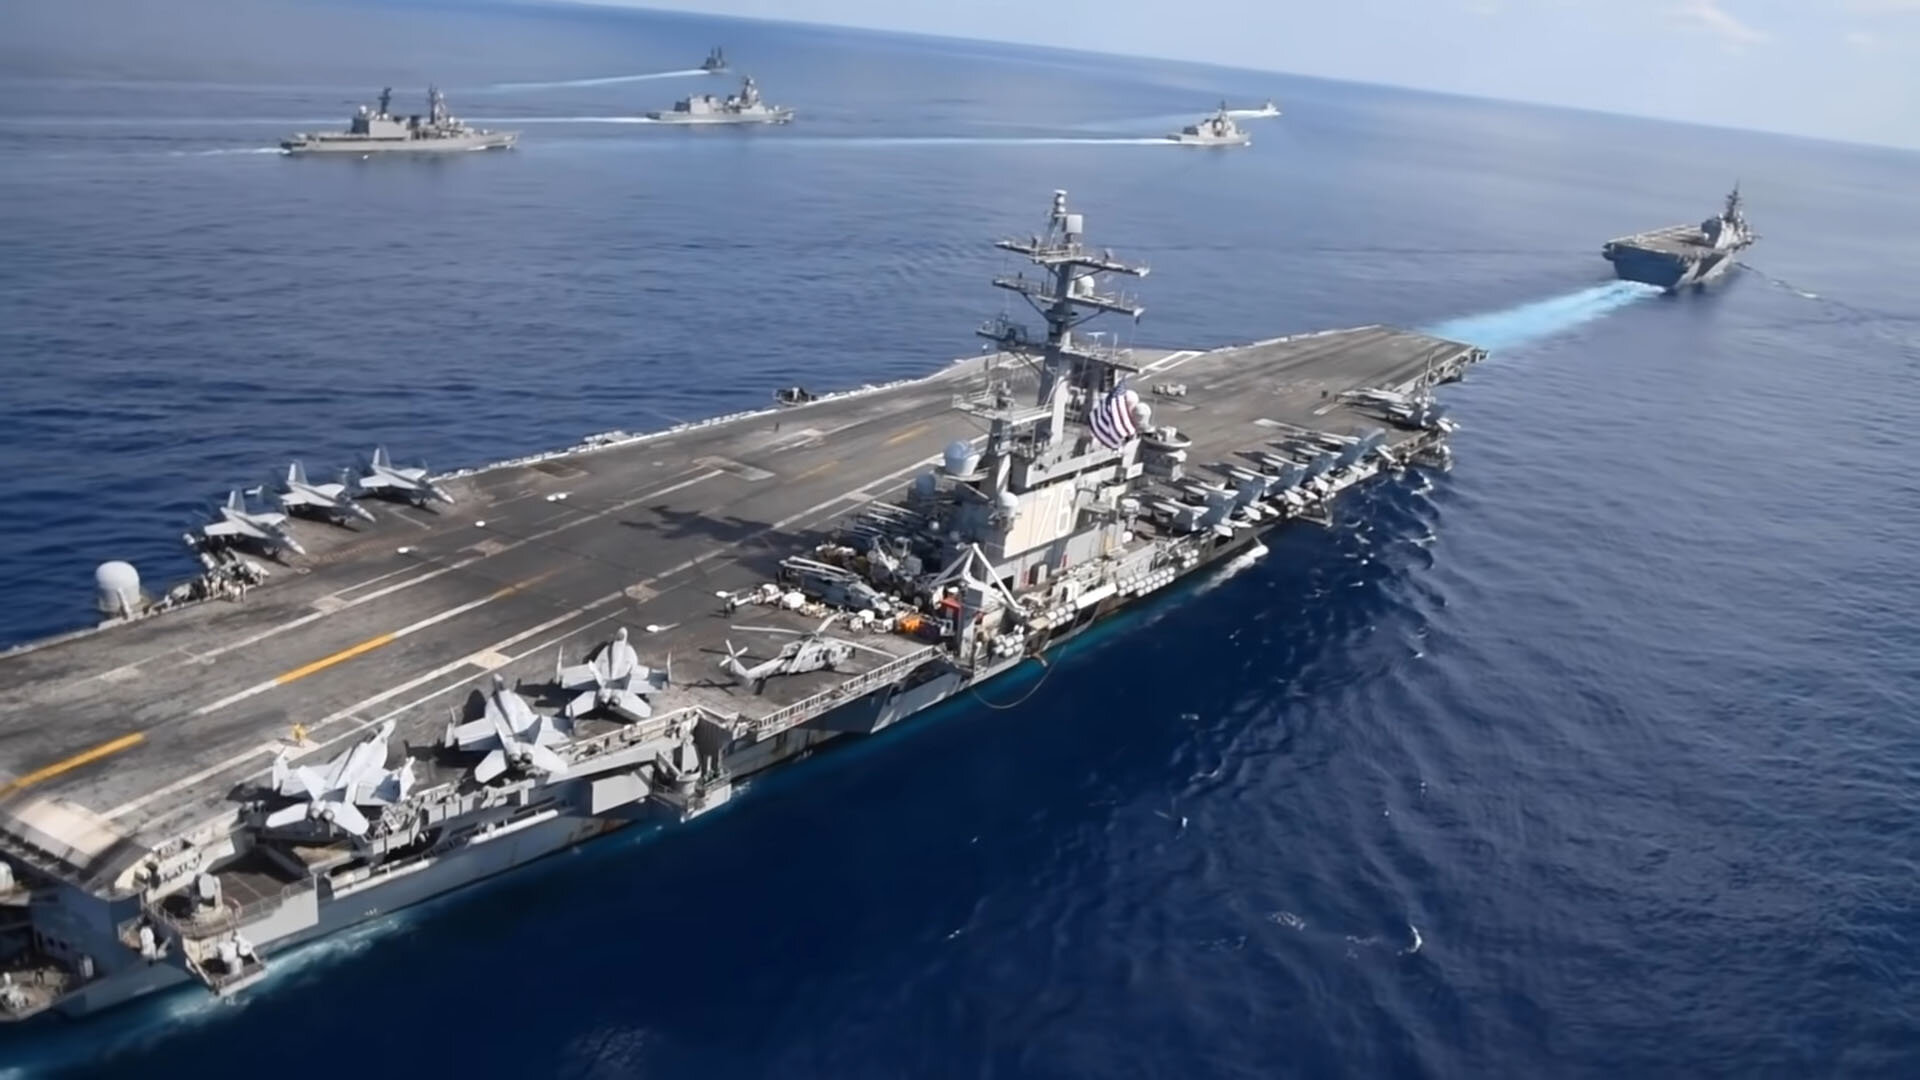 Two aircraft carriers with helicopters and aircrafts on its deck. She is surrounded by destroyers and Frigates.